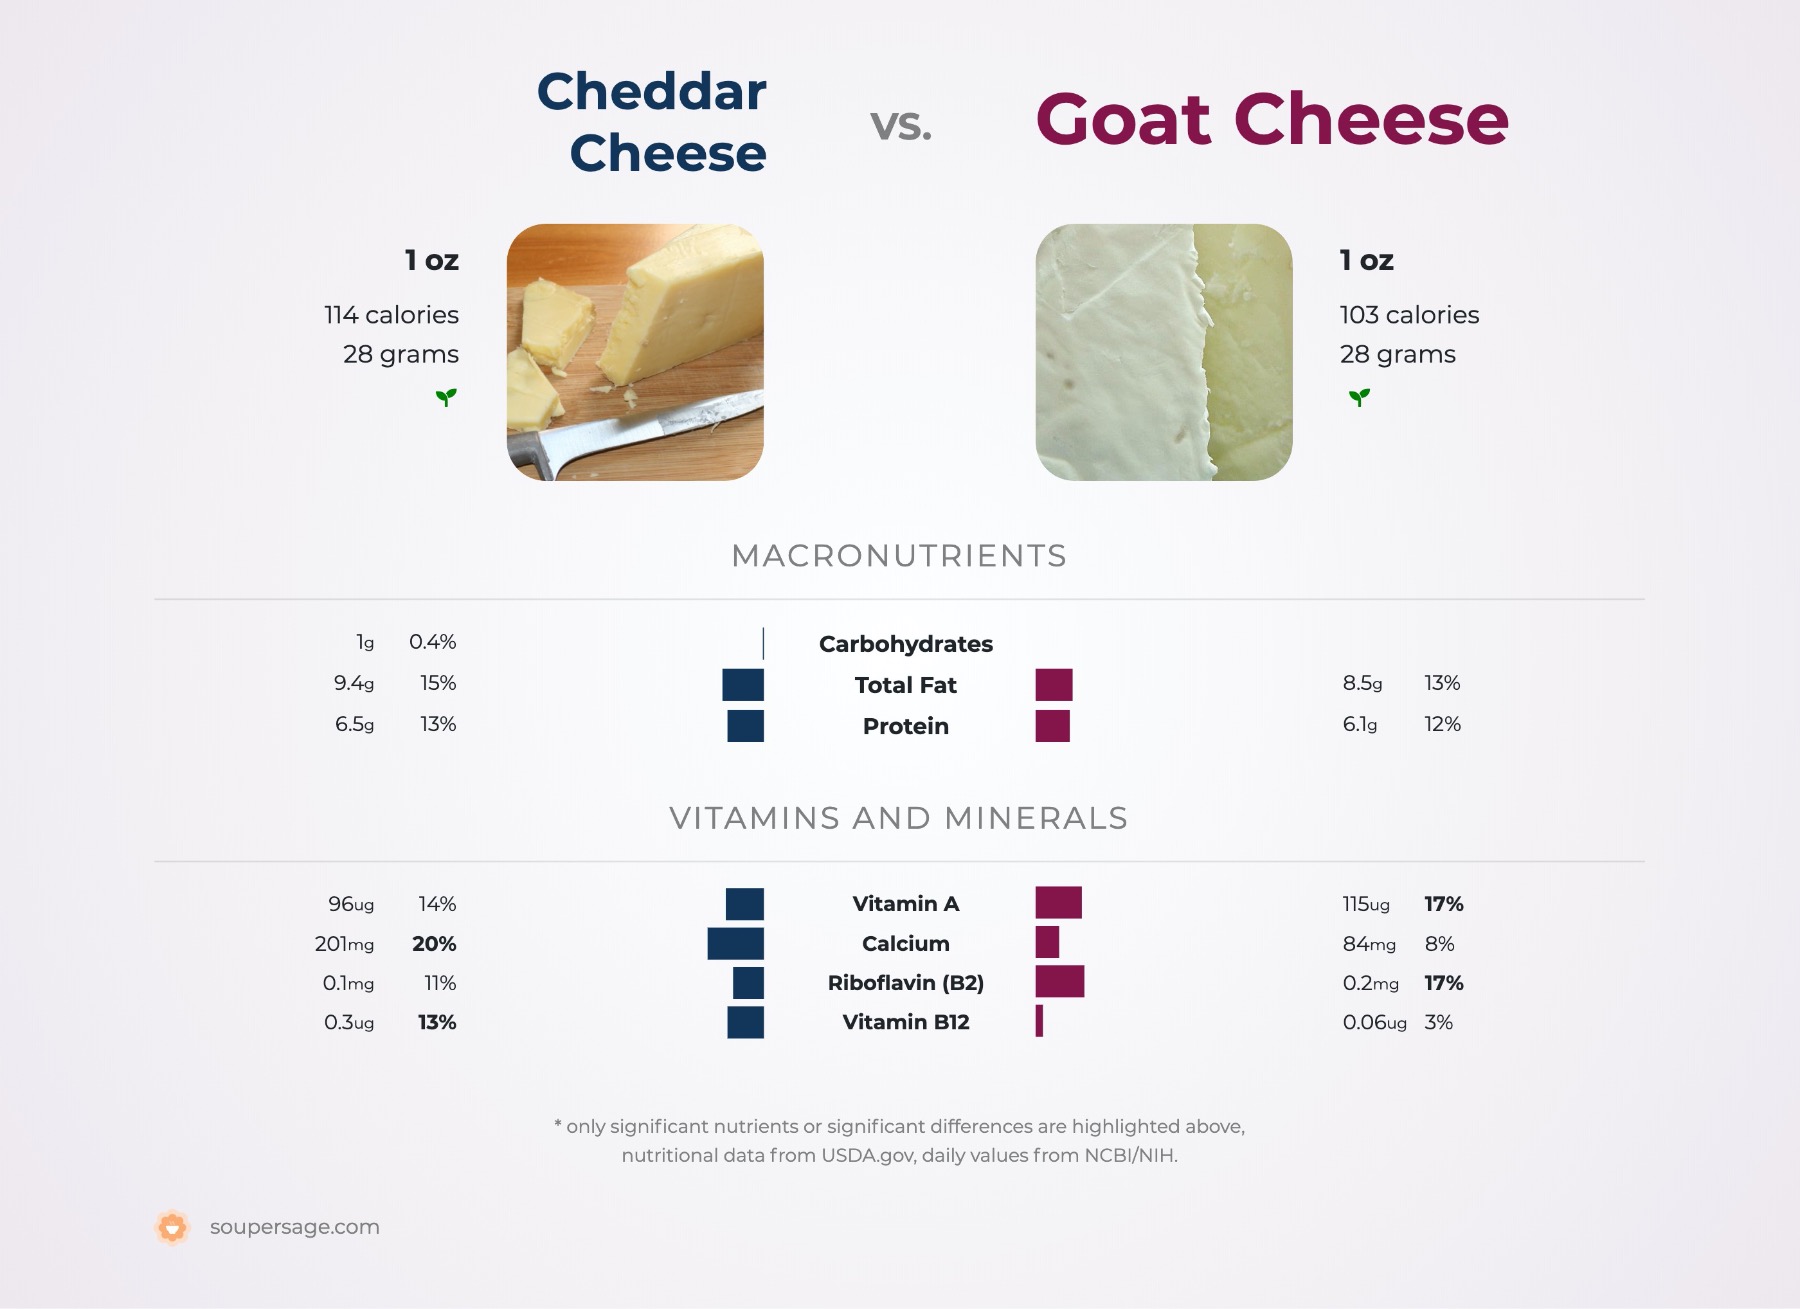 nutrition comparison of cheddar cheese vs. goat cheese